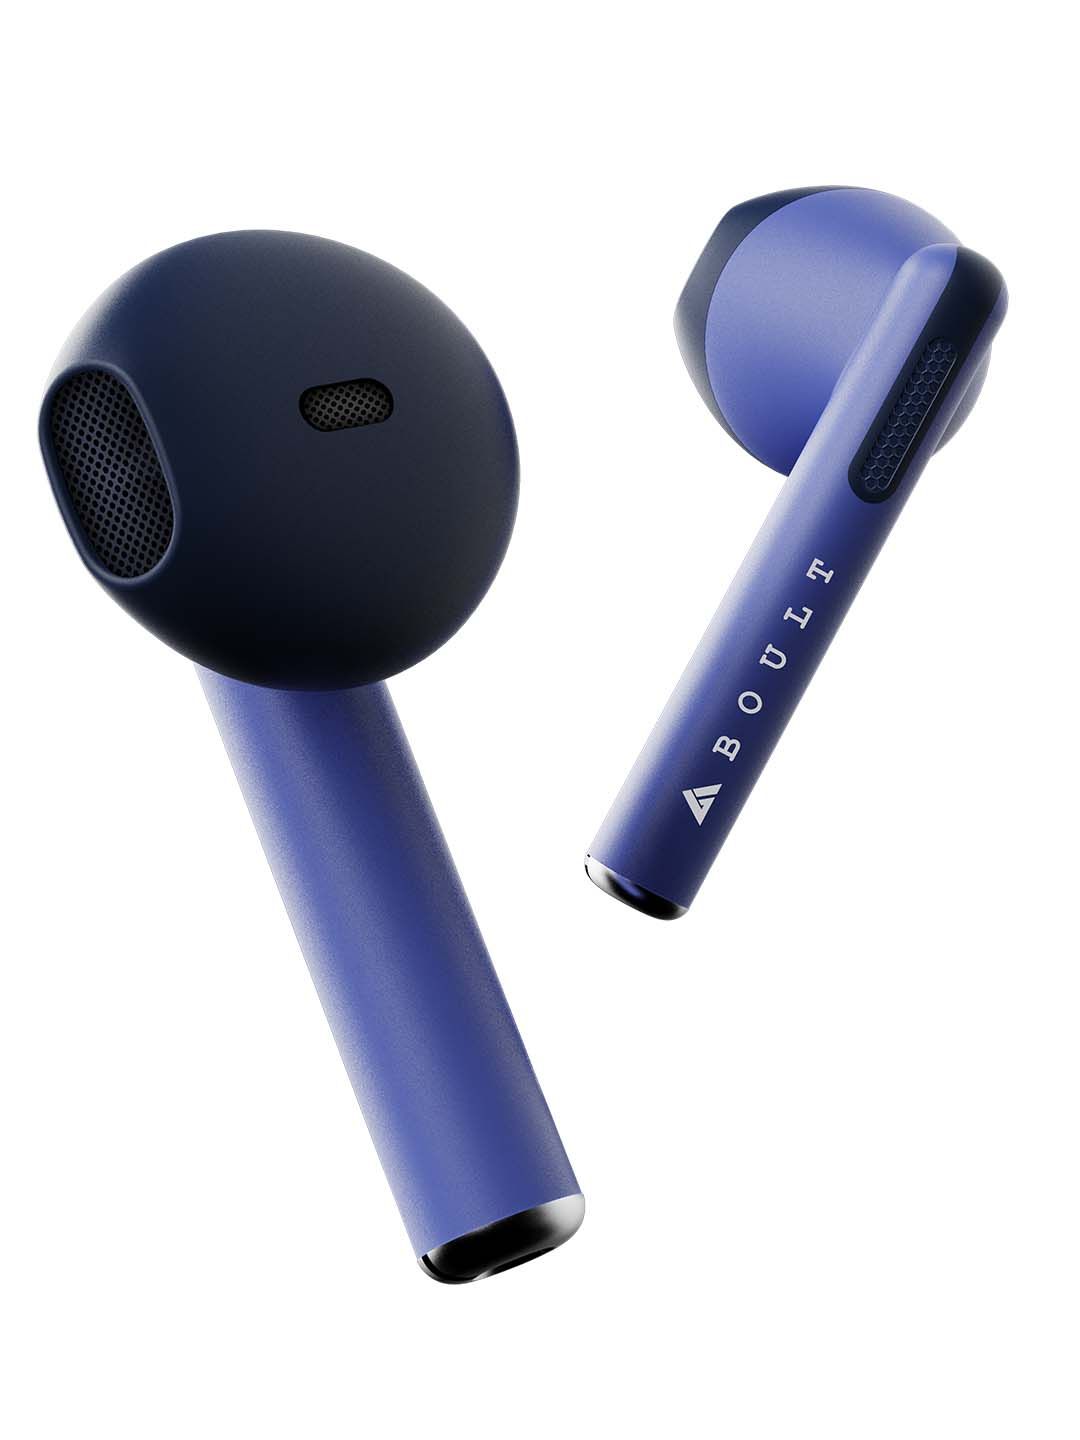 BOULT AUDIO Xpods True Wireless Earbuds - Blue Price in India